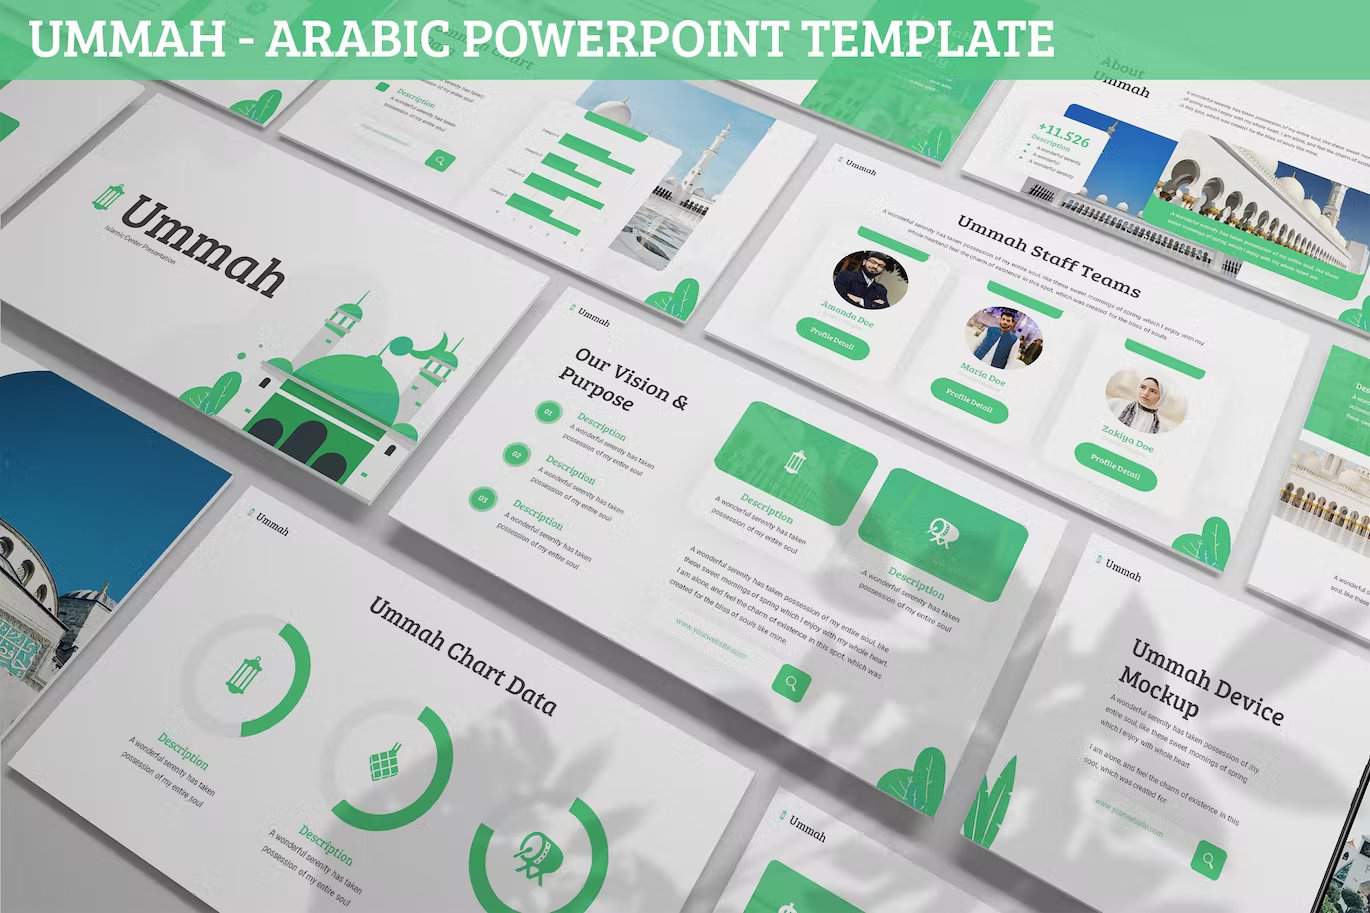 White lettering "Ummah - Arabic Powerpoint Template" on a green background and different presentation templates on a gray background.